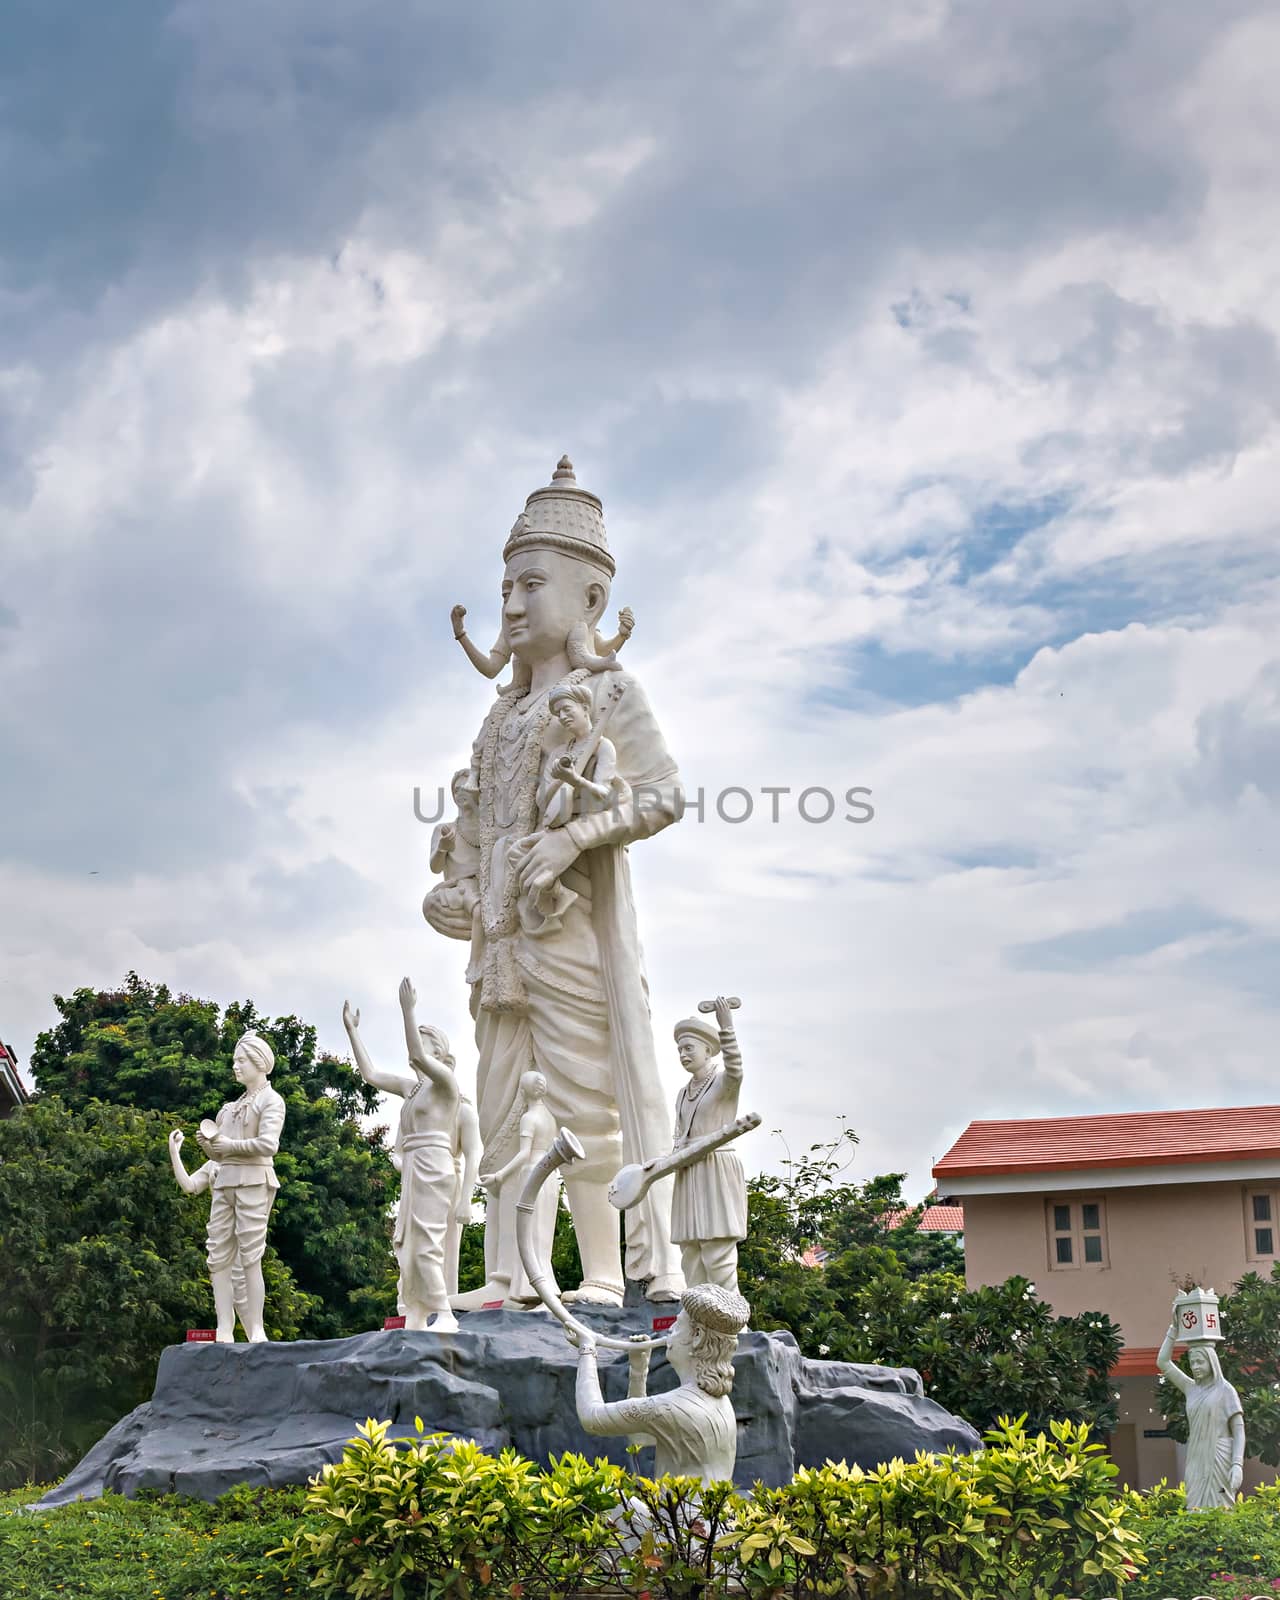 A huge statue of Lord Viththla in Anandsagar Bhakt Niwas Sankul in Shegaon famous for Shree Gajanan Maharaj temple. by lalam